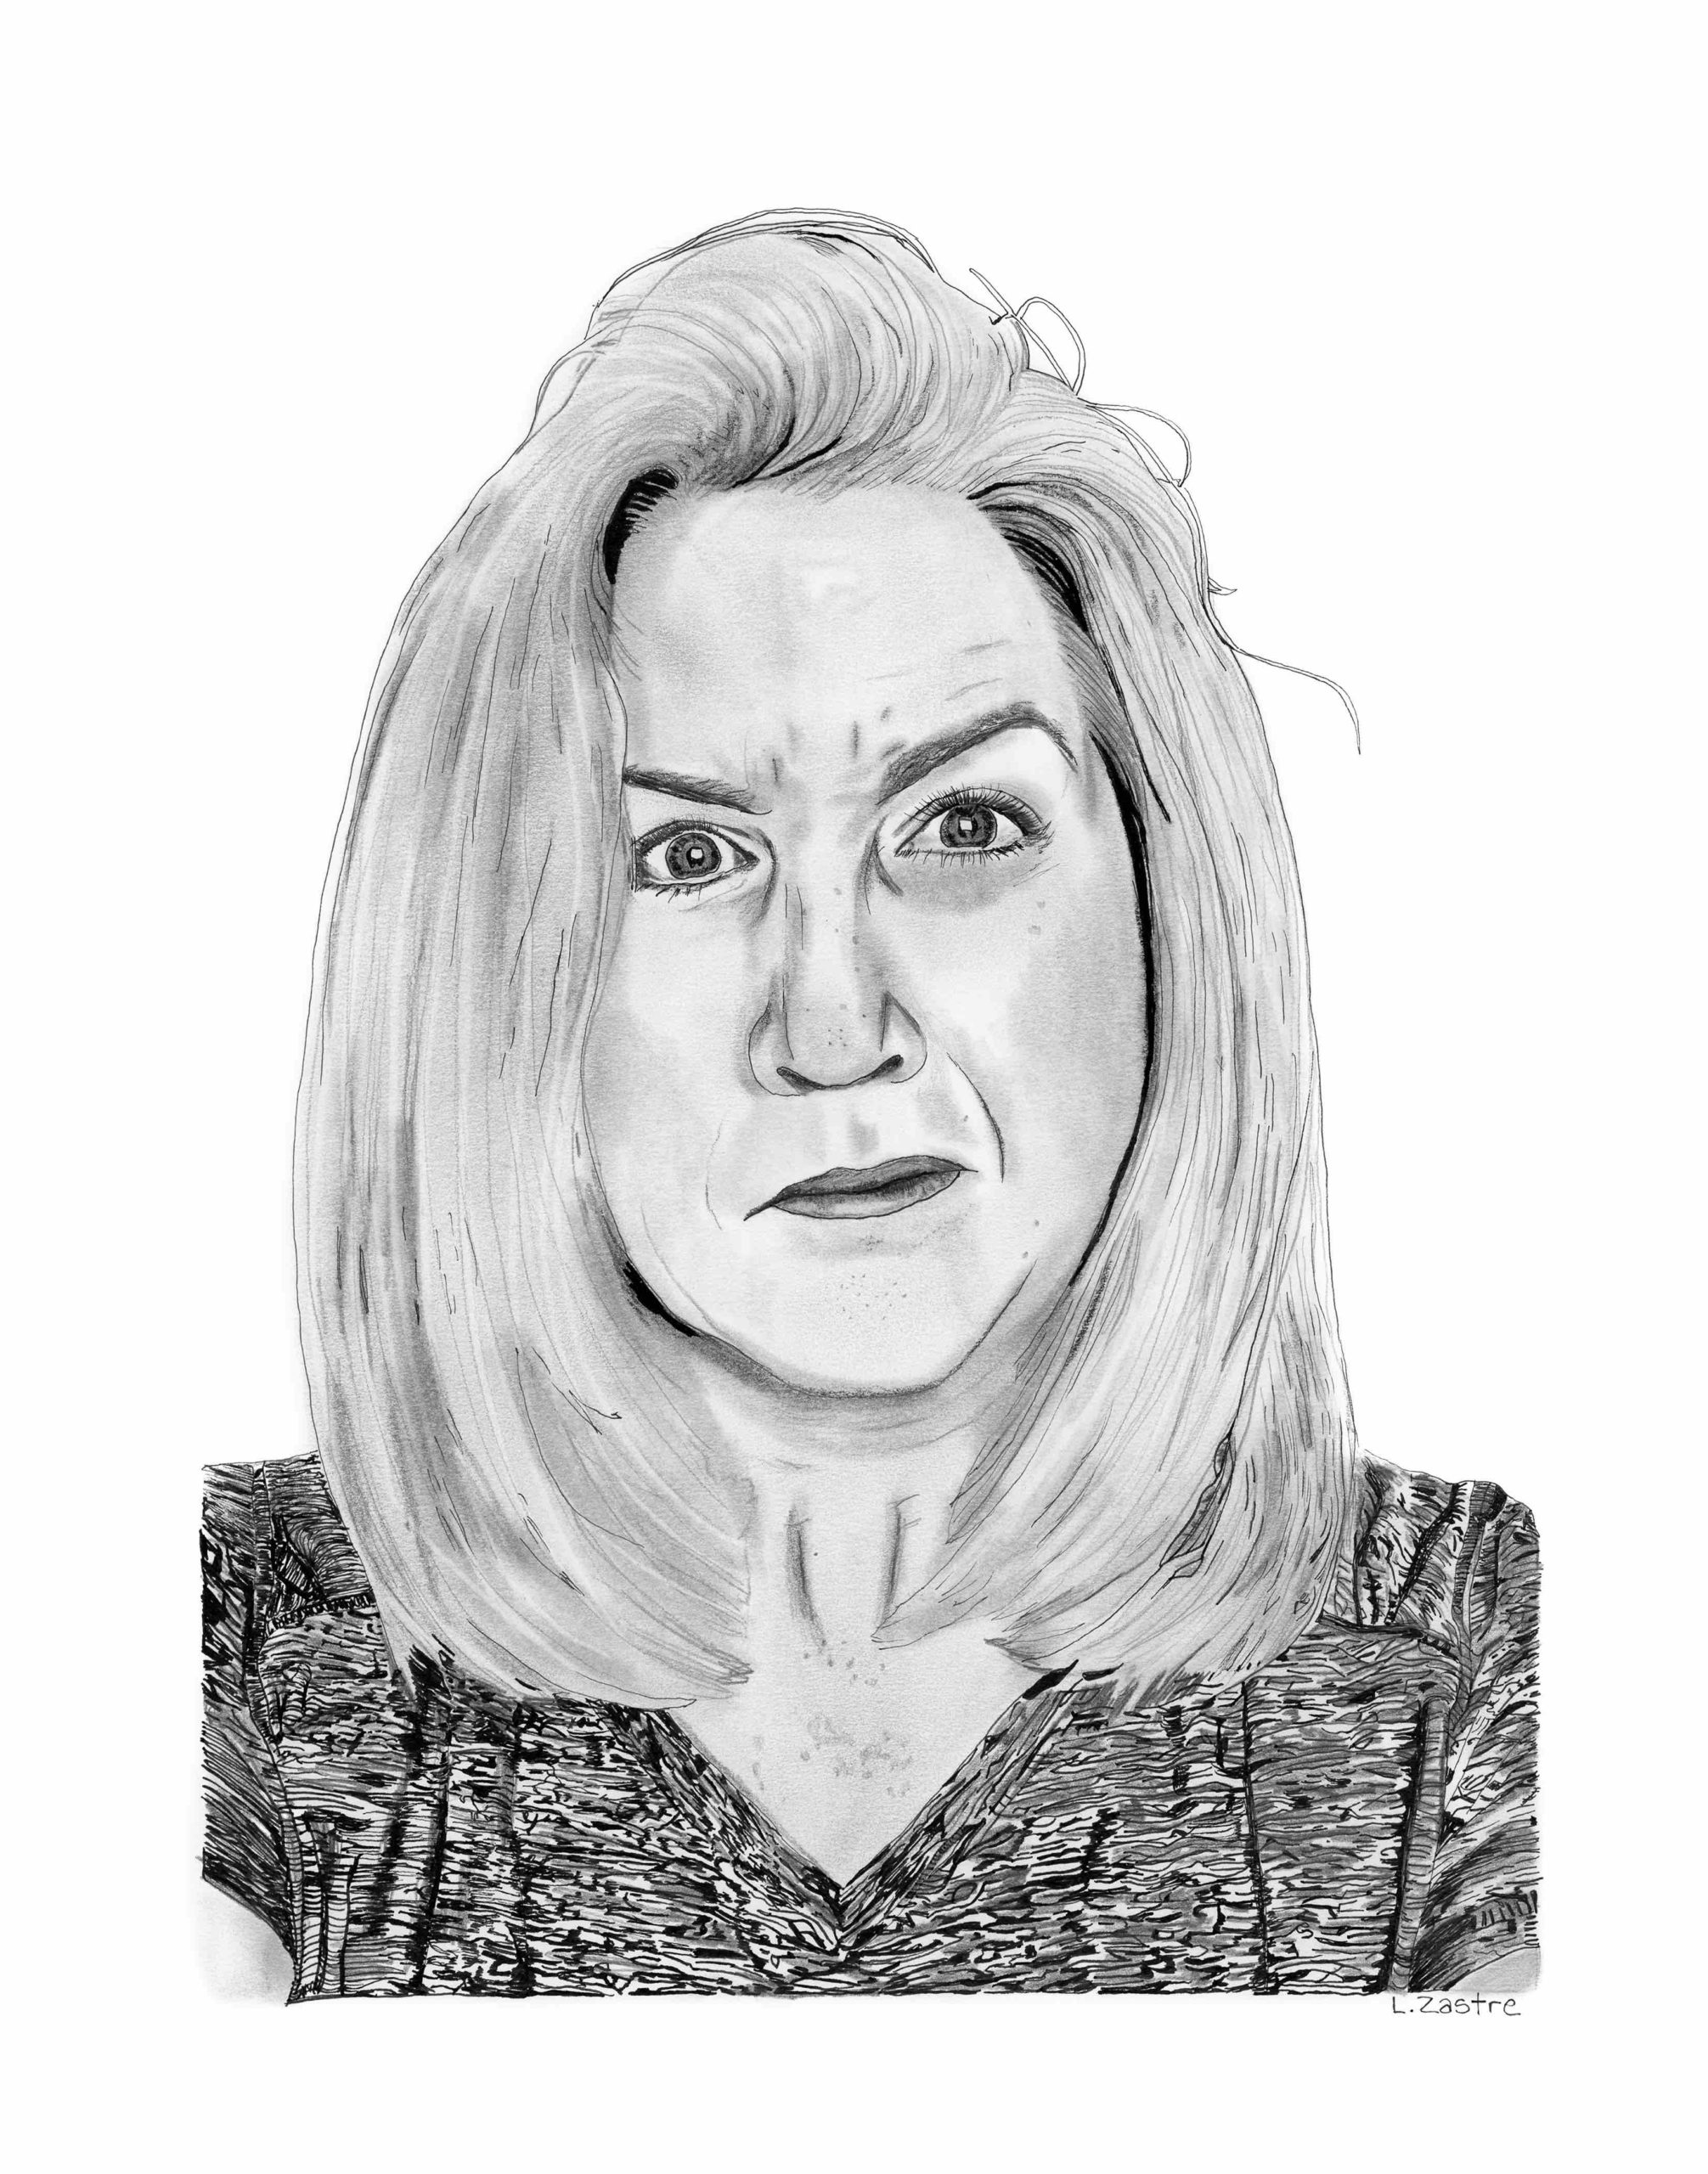 This is a drawing of a woman with light-coloured shoulder length hair. She is wearing a dark t-shirt and scowling quizzically.